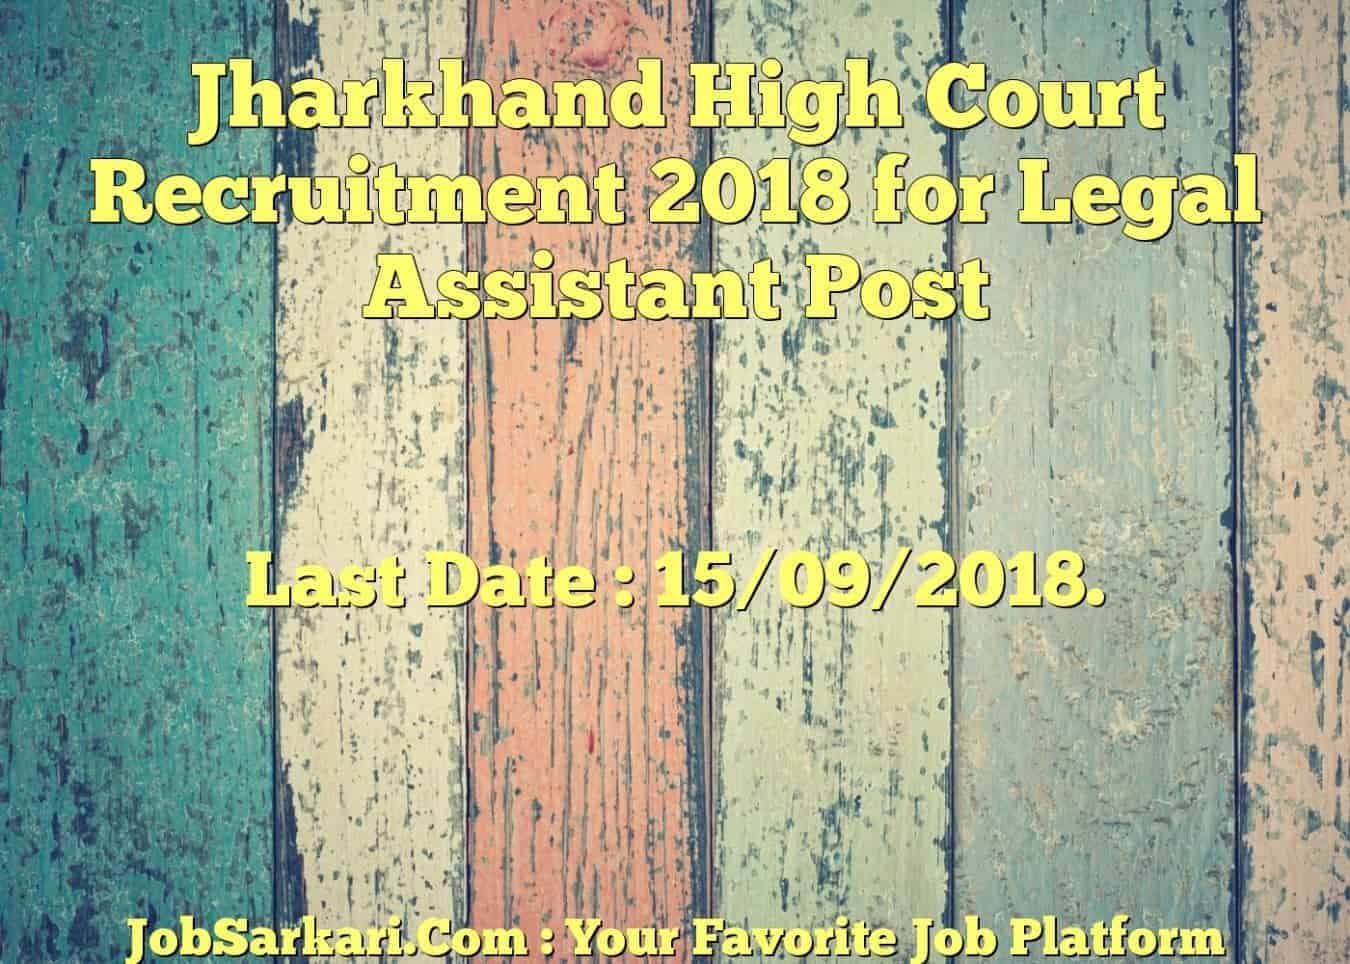 Jharkhand High Court Recruitment 2018 for Legal Assistant Post